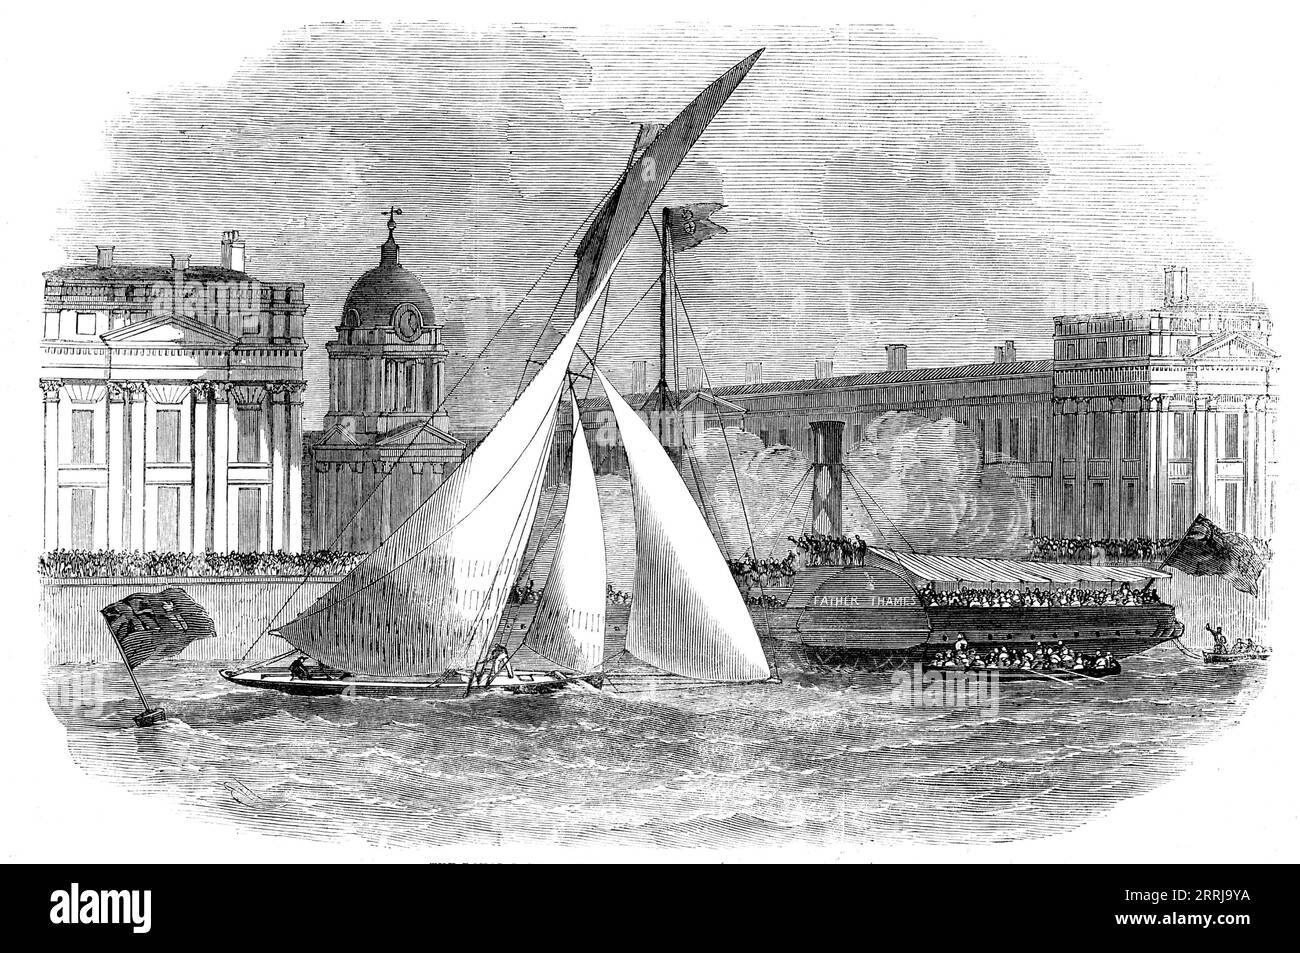 The Royal London Yacht Club Match, 1858. Sailing on the Thames. 'The race was with third-class boats only, and three prizes were contended for, the distance being from Erith to Coalhouse Point returning to a boat moored off Greenwich...There were four boats entered...The steamer Father Thames was chartered by the club to convey the members and their friends, which, on leaving Blackwall, was filled with a brilliant and fashionable company of ladies and gentlemen...Little Mosquito was away first, closely followed by the Julia, whose topsail was first set; the Atalanta was next, and then the Blue Stock Photo